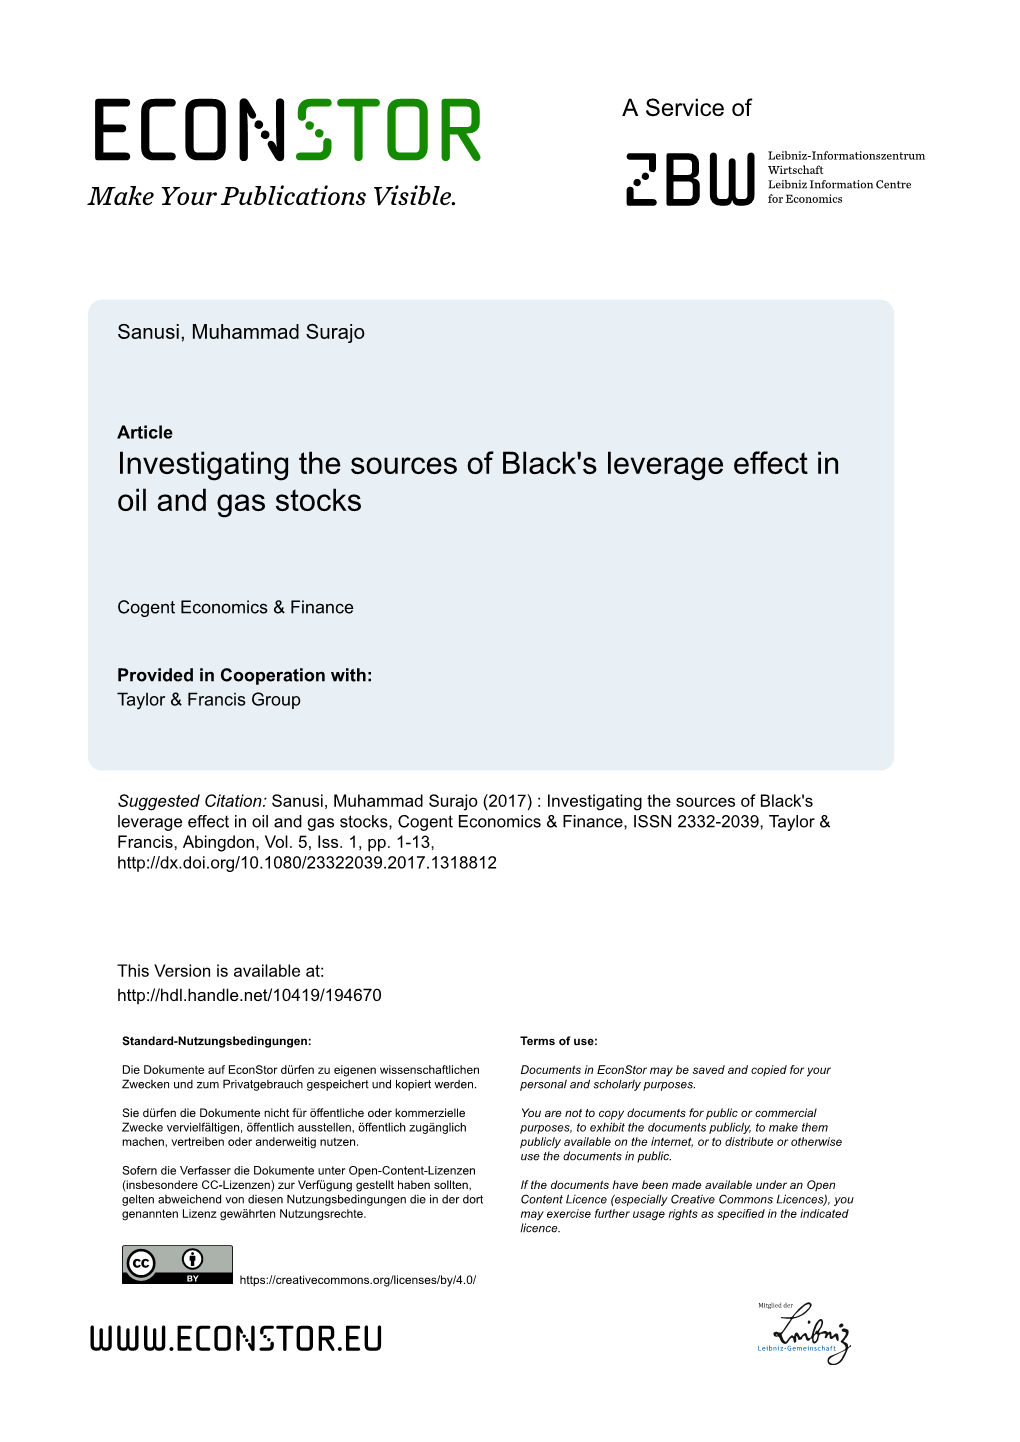 Investigating the Sources of Black's Leverage Effect in Oil and Gas Stocks